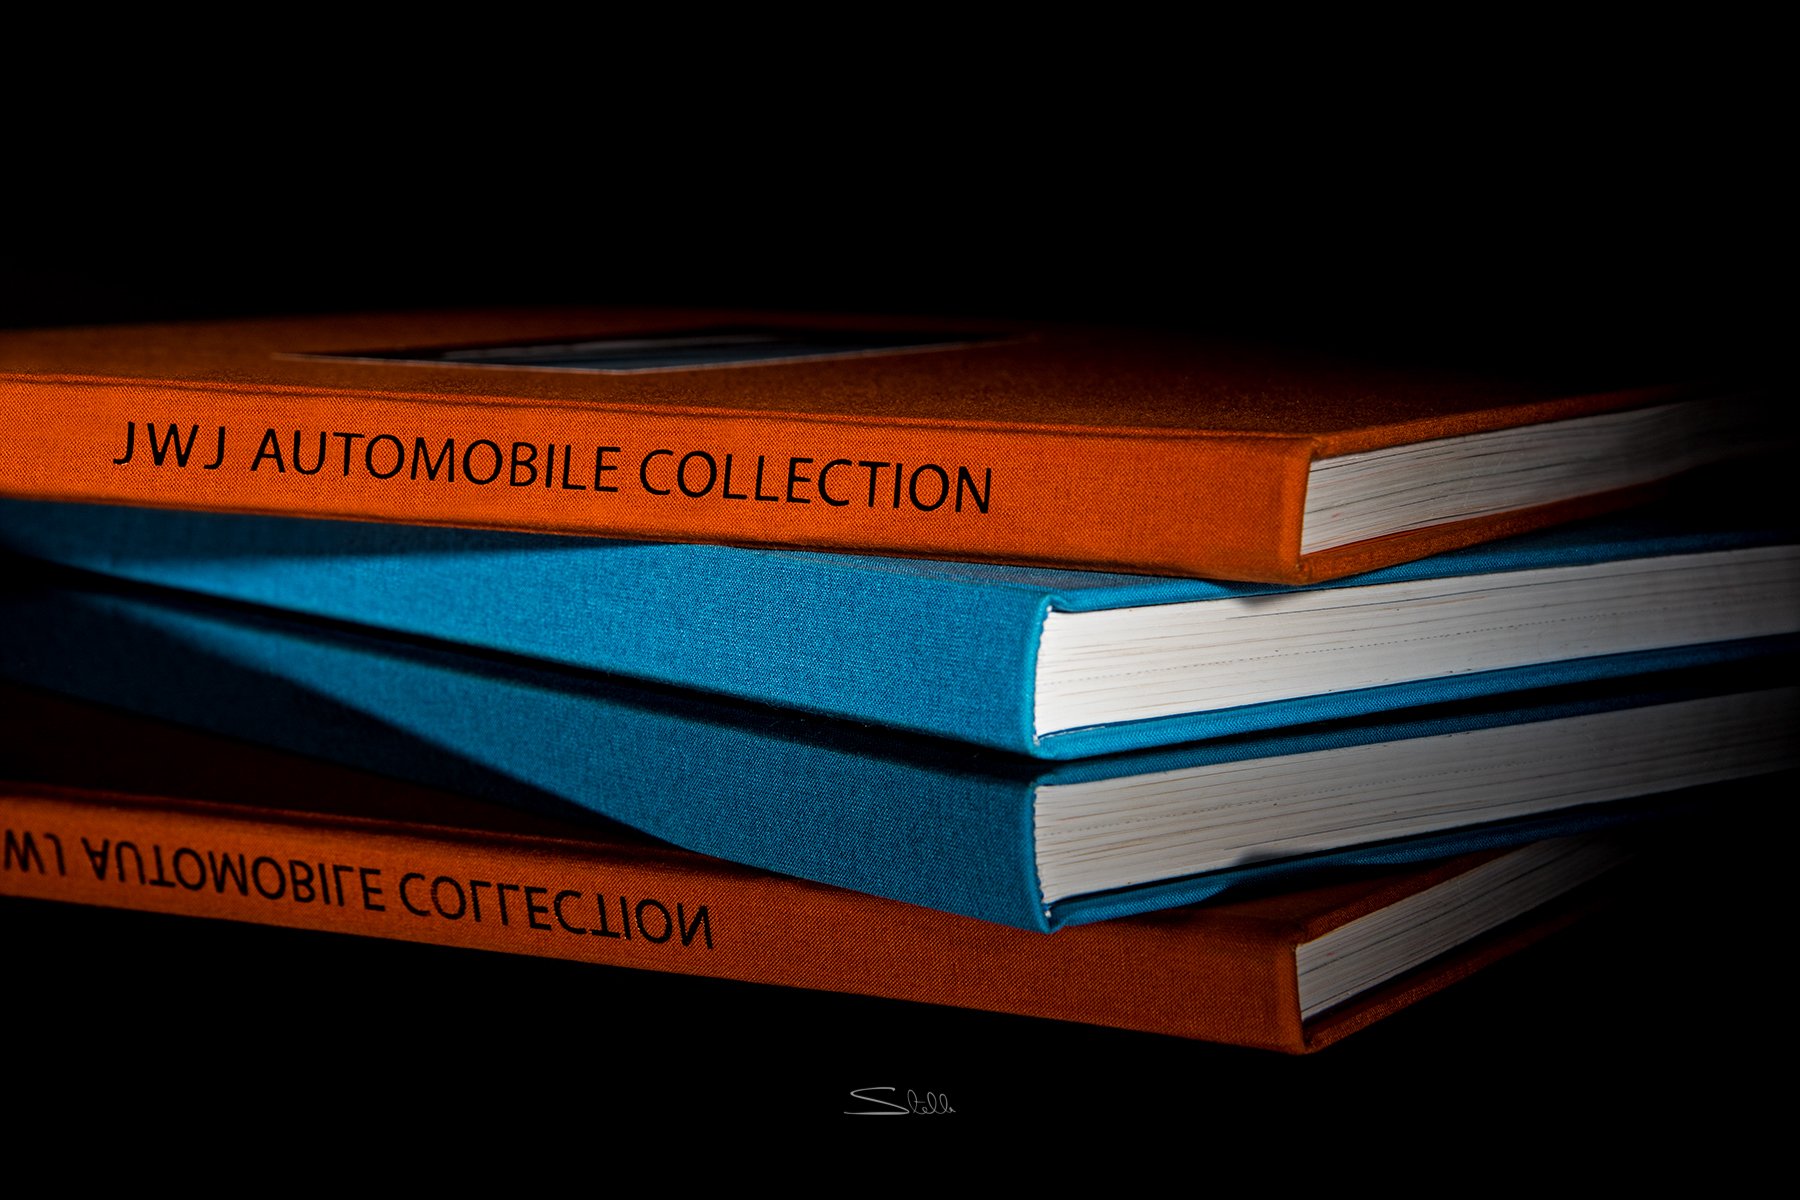 JWJ Car Collection Book